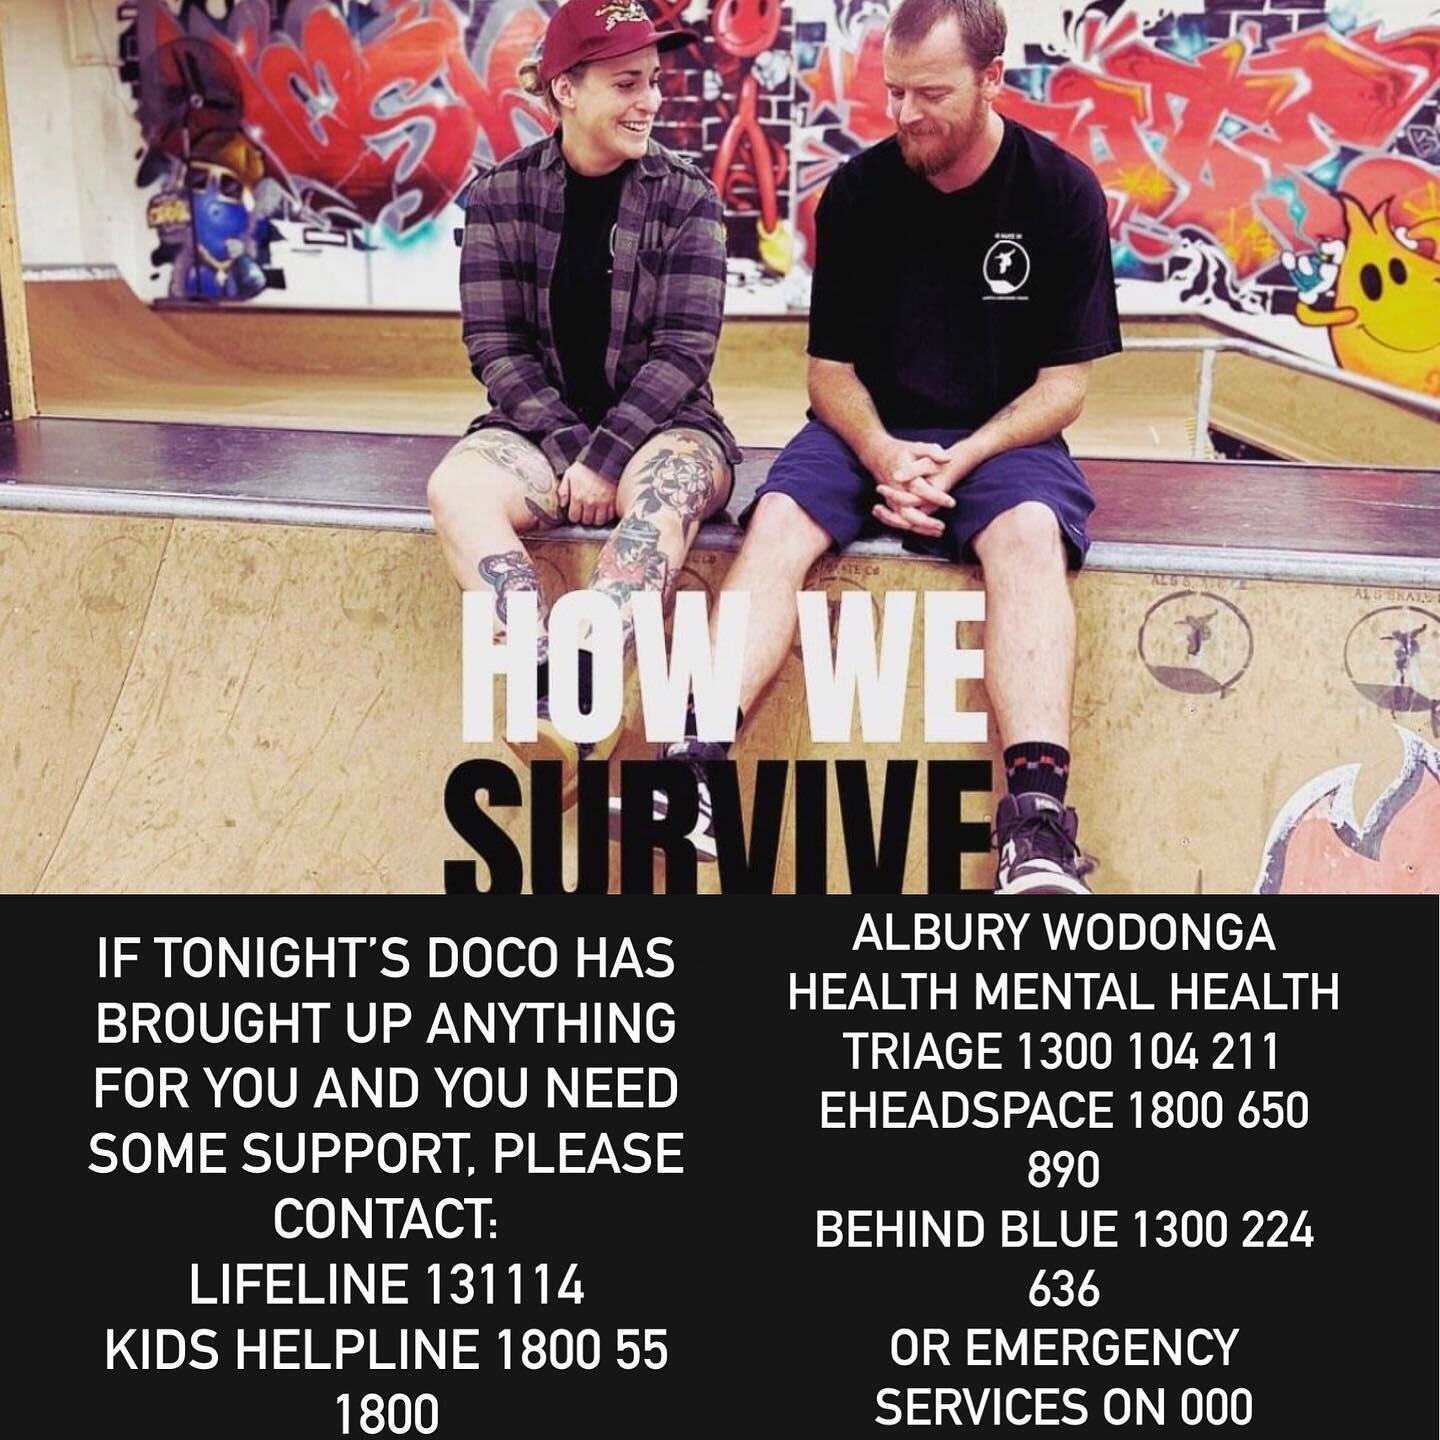 If tonight&rsquo;s doco has brought up anything for you and you need some support, please contact: 
Lifeline 131114
Kids helpline 1800 55 1800 
Albury Wodonga Health Mental Health Triage 1300 104 211
eheadspace 1800 650 890
Behind Blue 1300 224 636 
